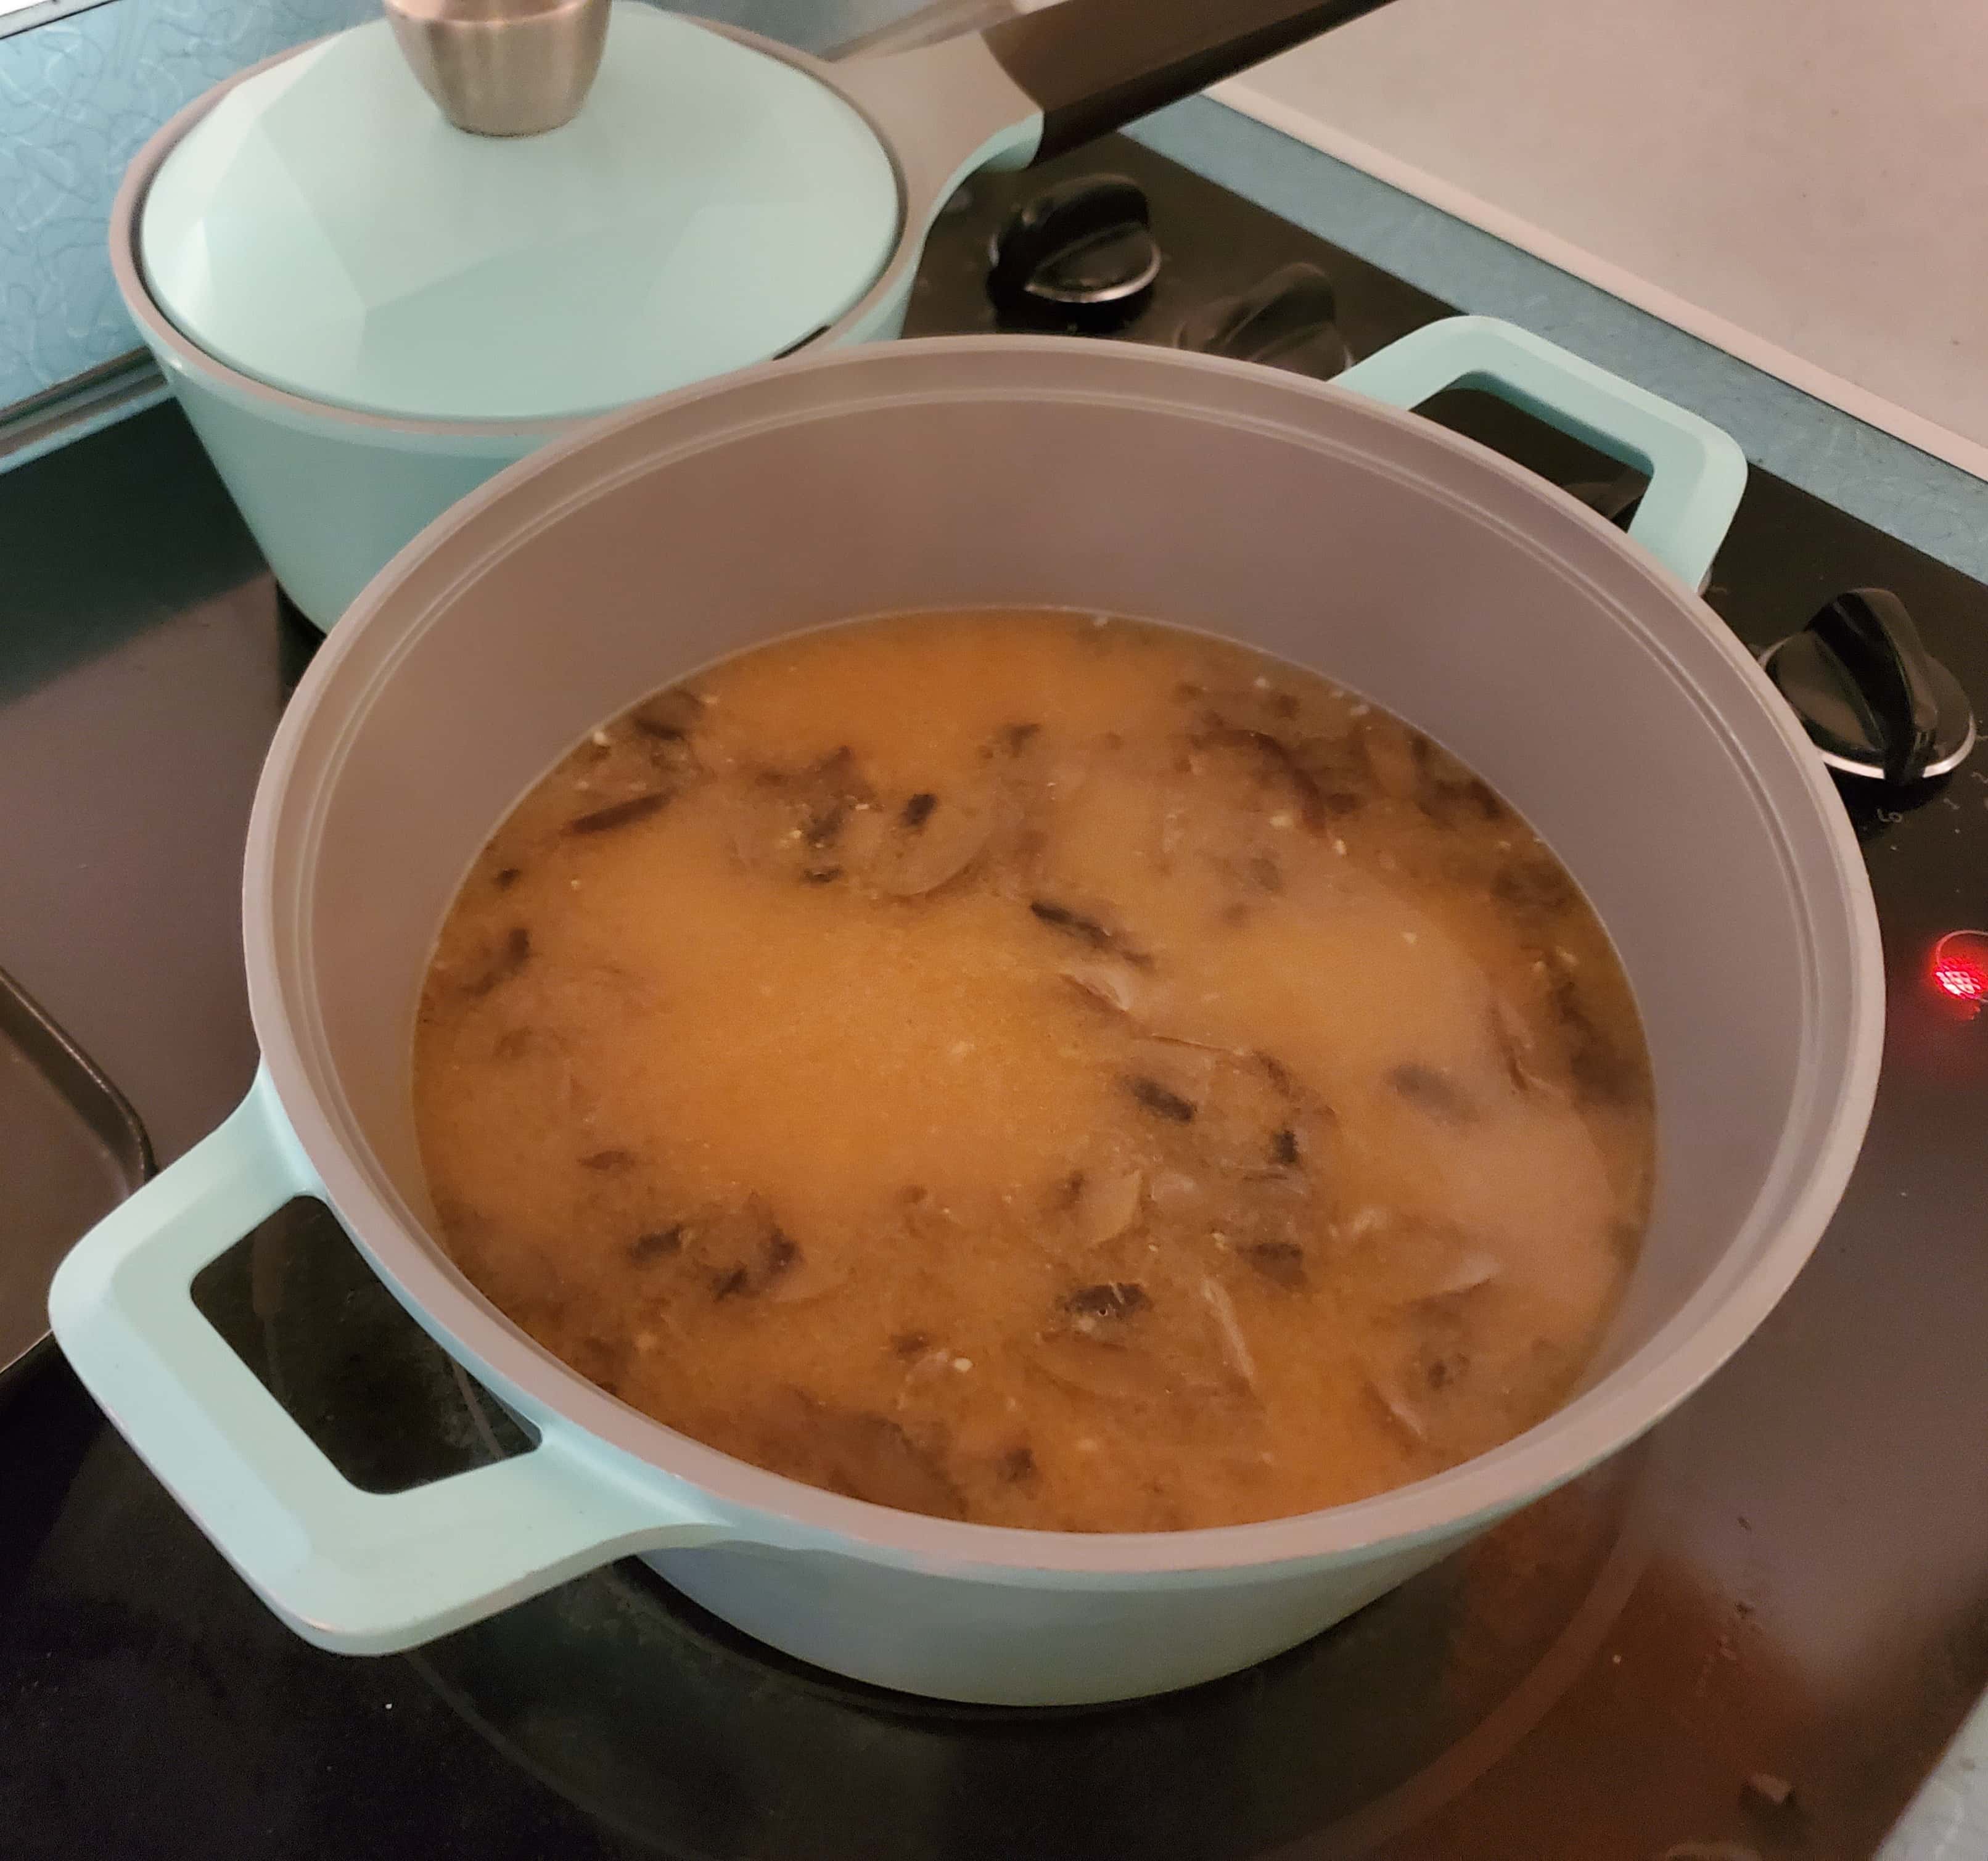 Miso and mushroom broth cooking in a pot